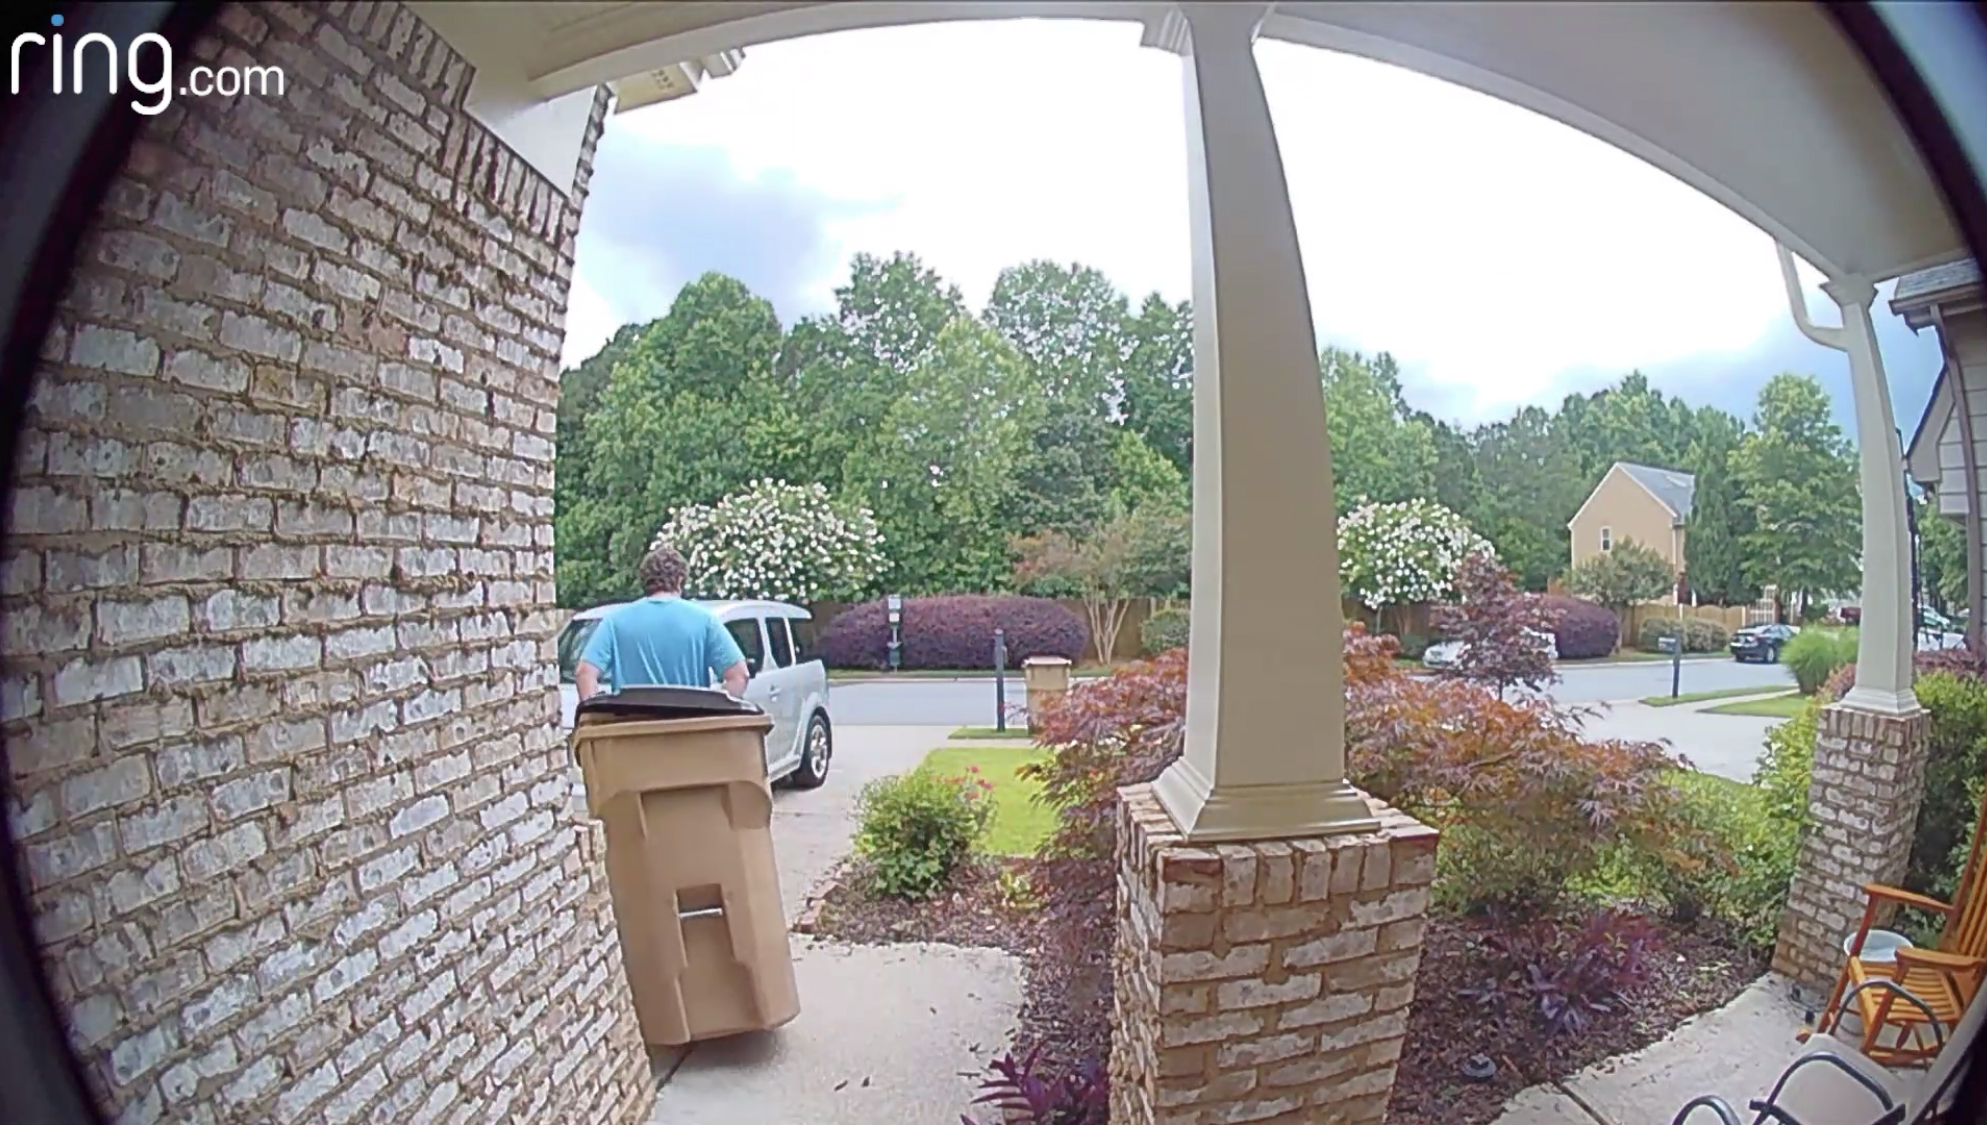 man pulling trash can away from front door of house